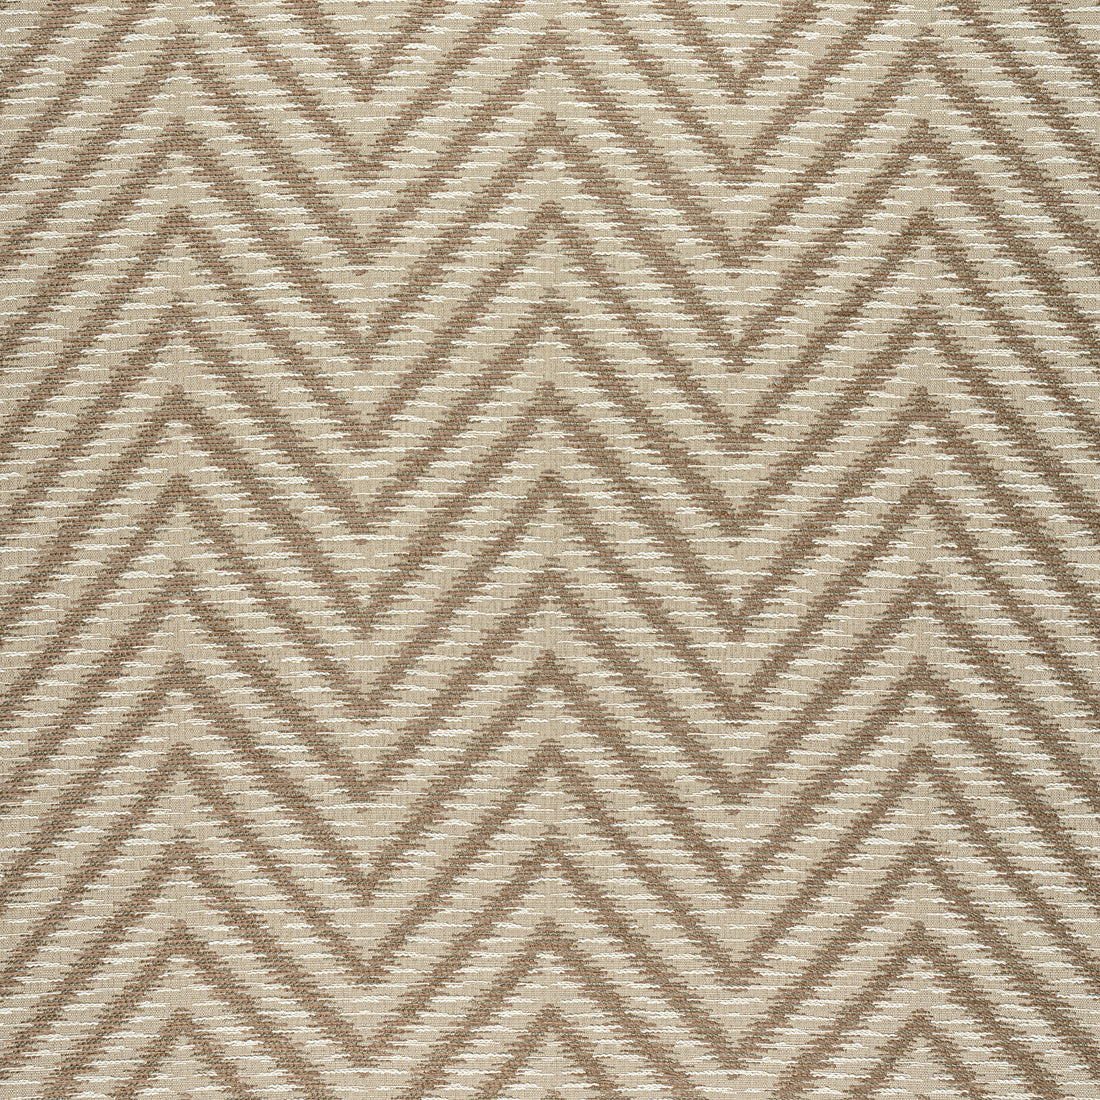 Aliso fabric in mocha color - pattern number W8822 - by Thibaut in the Haven collection